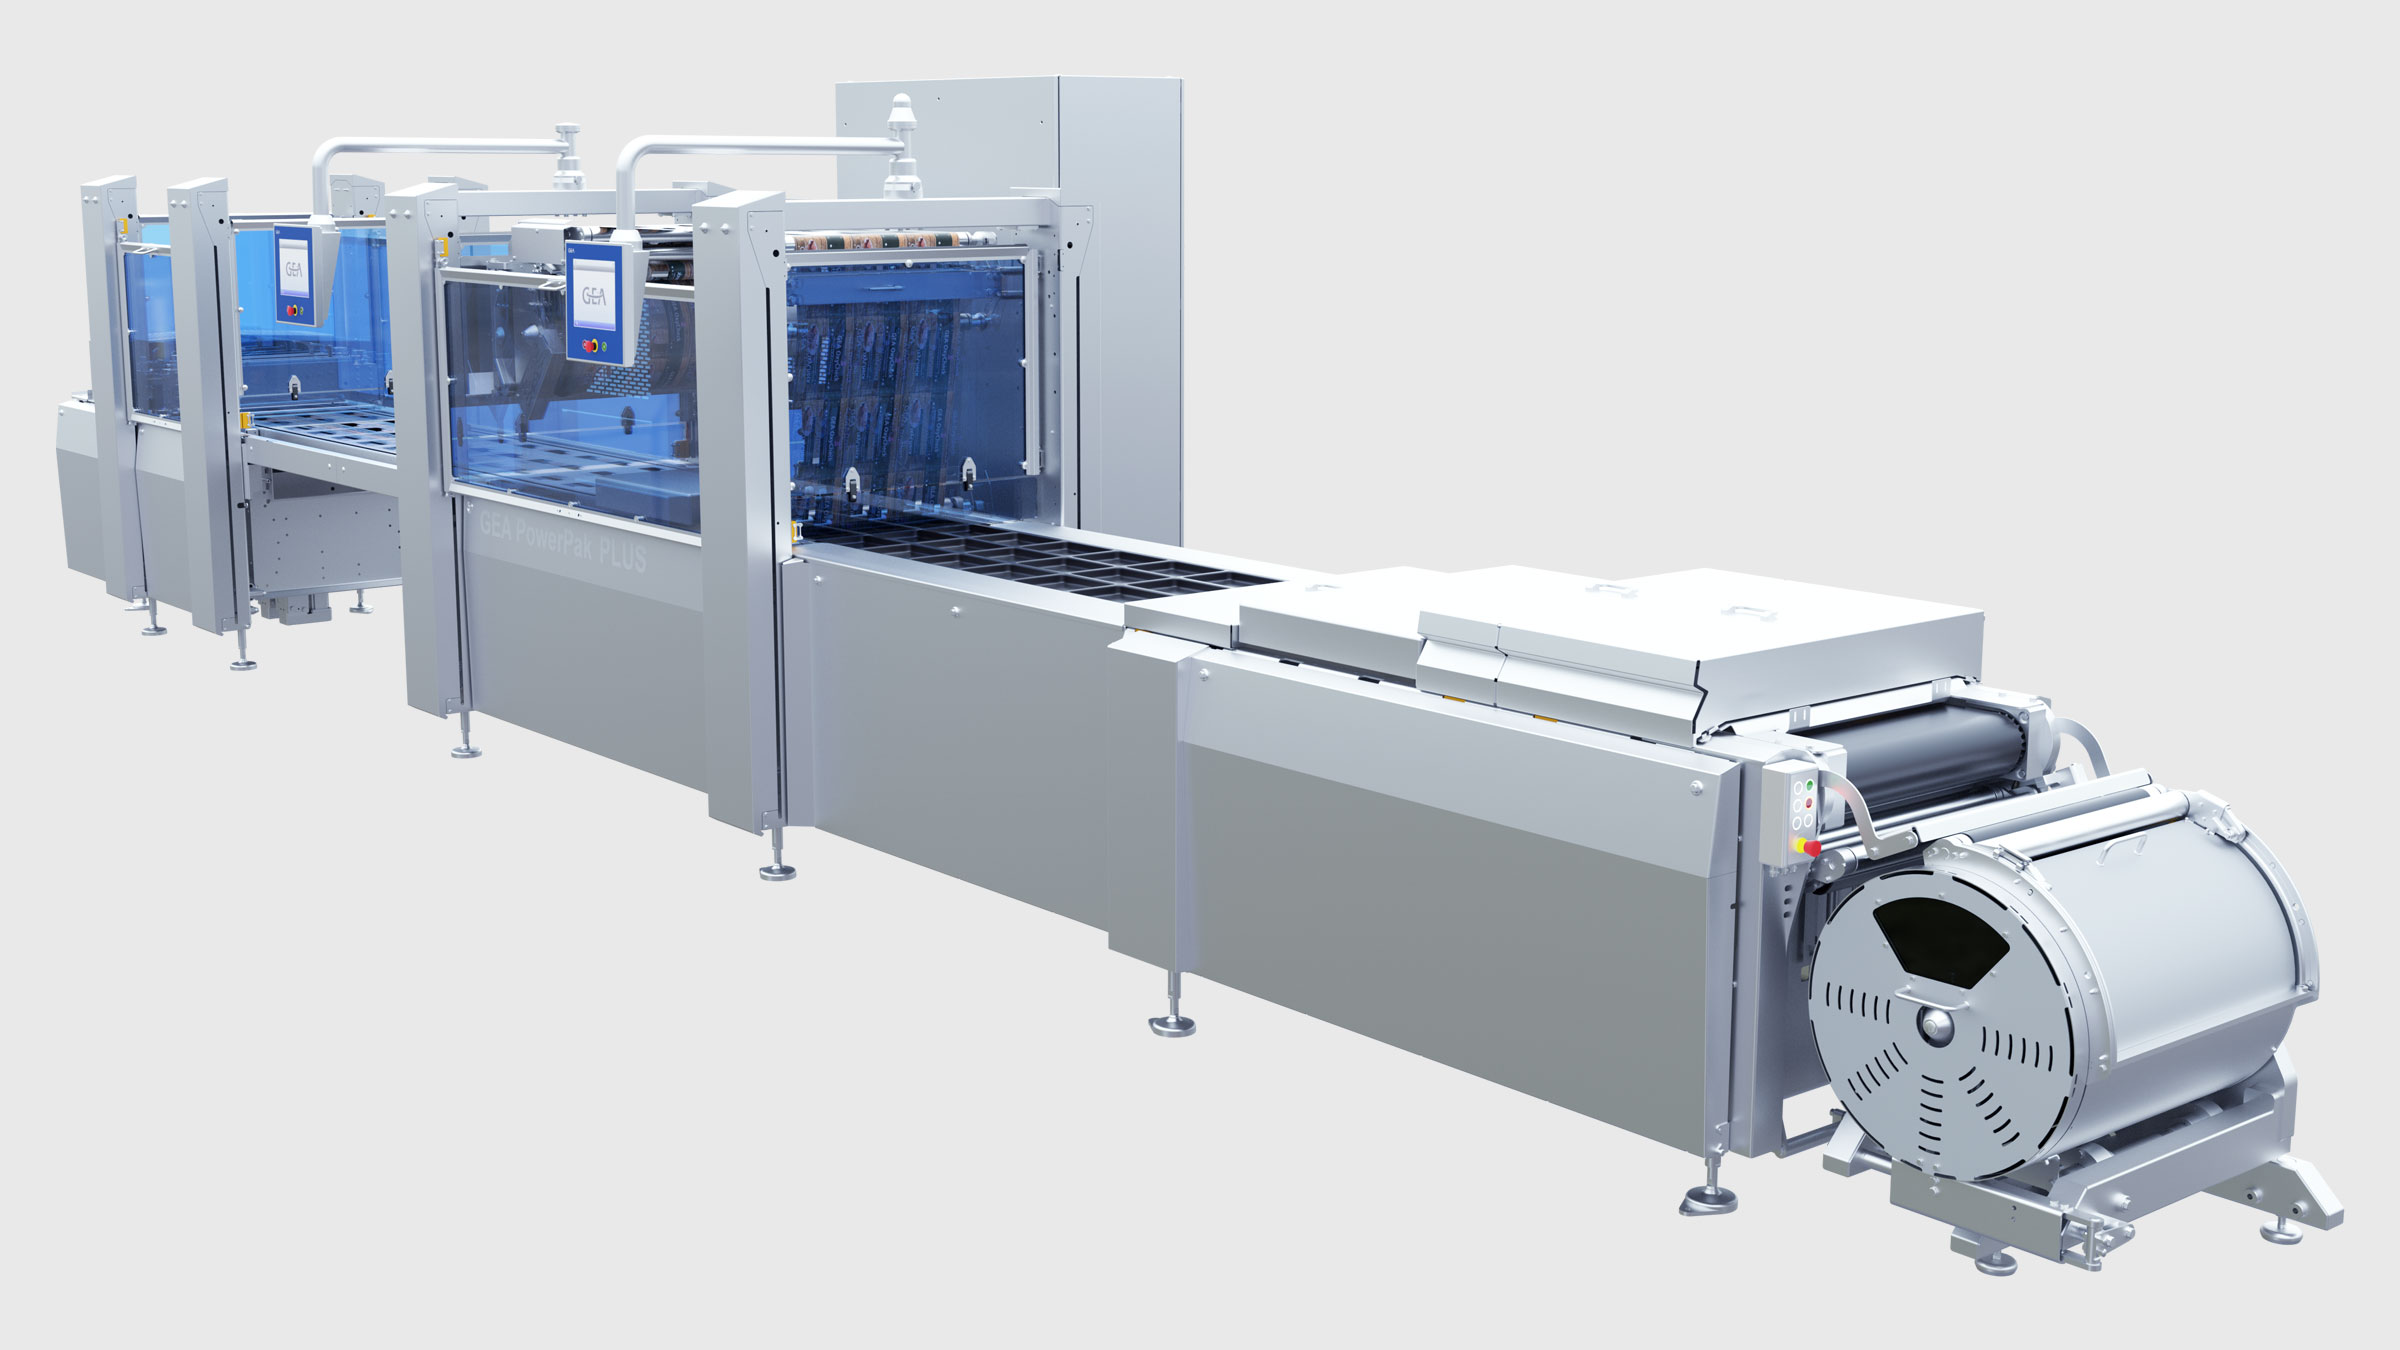 GEA to provide solutions at FoodEx 2020